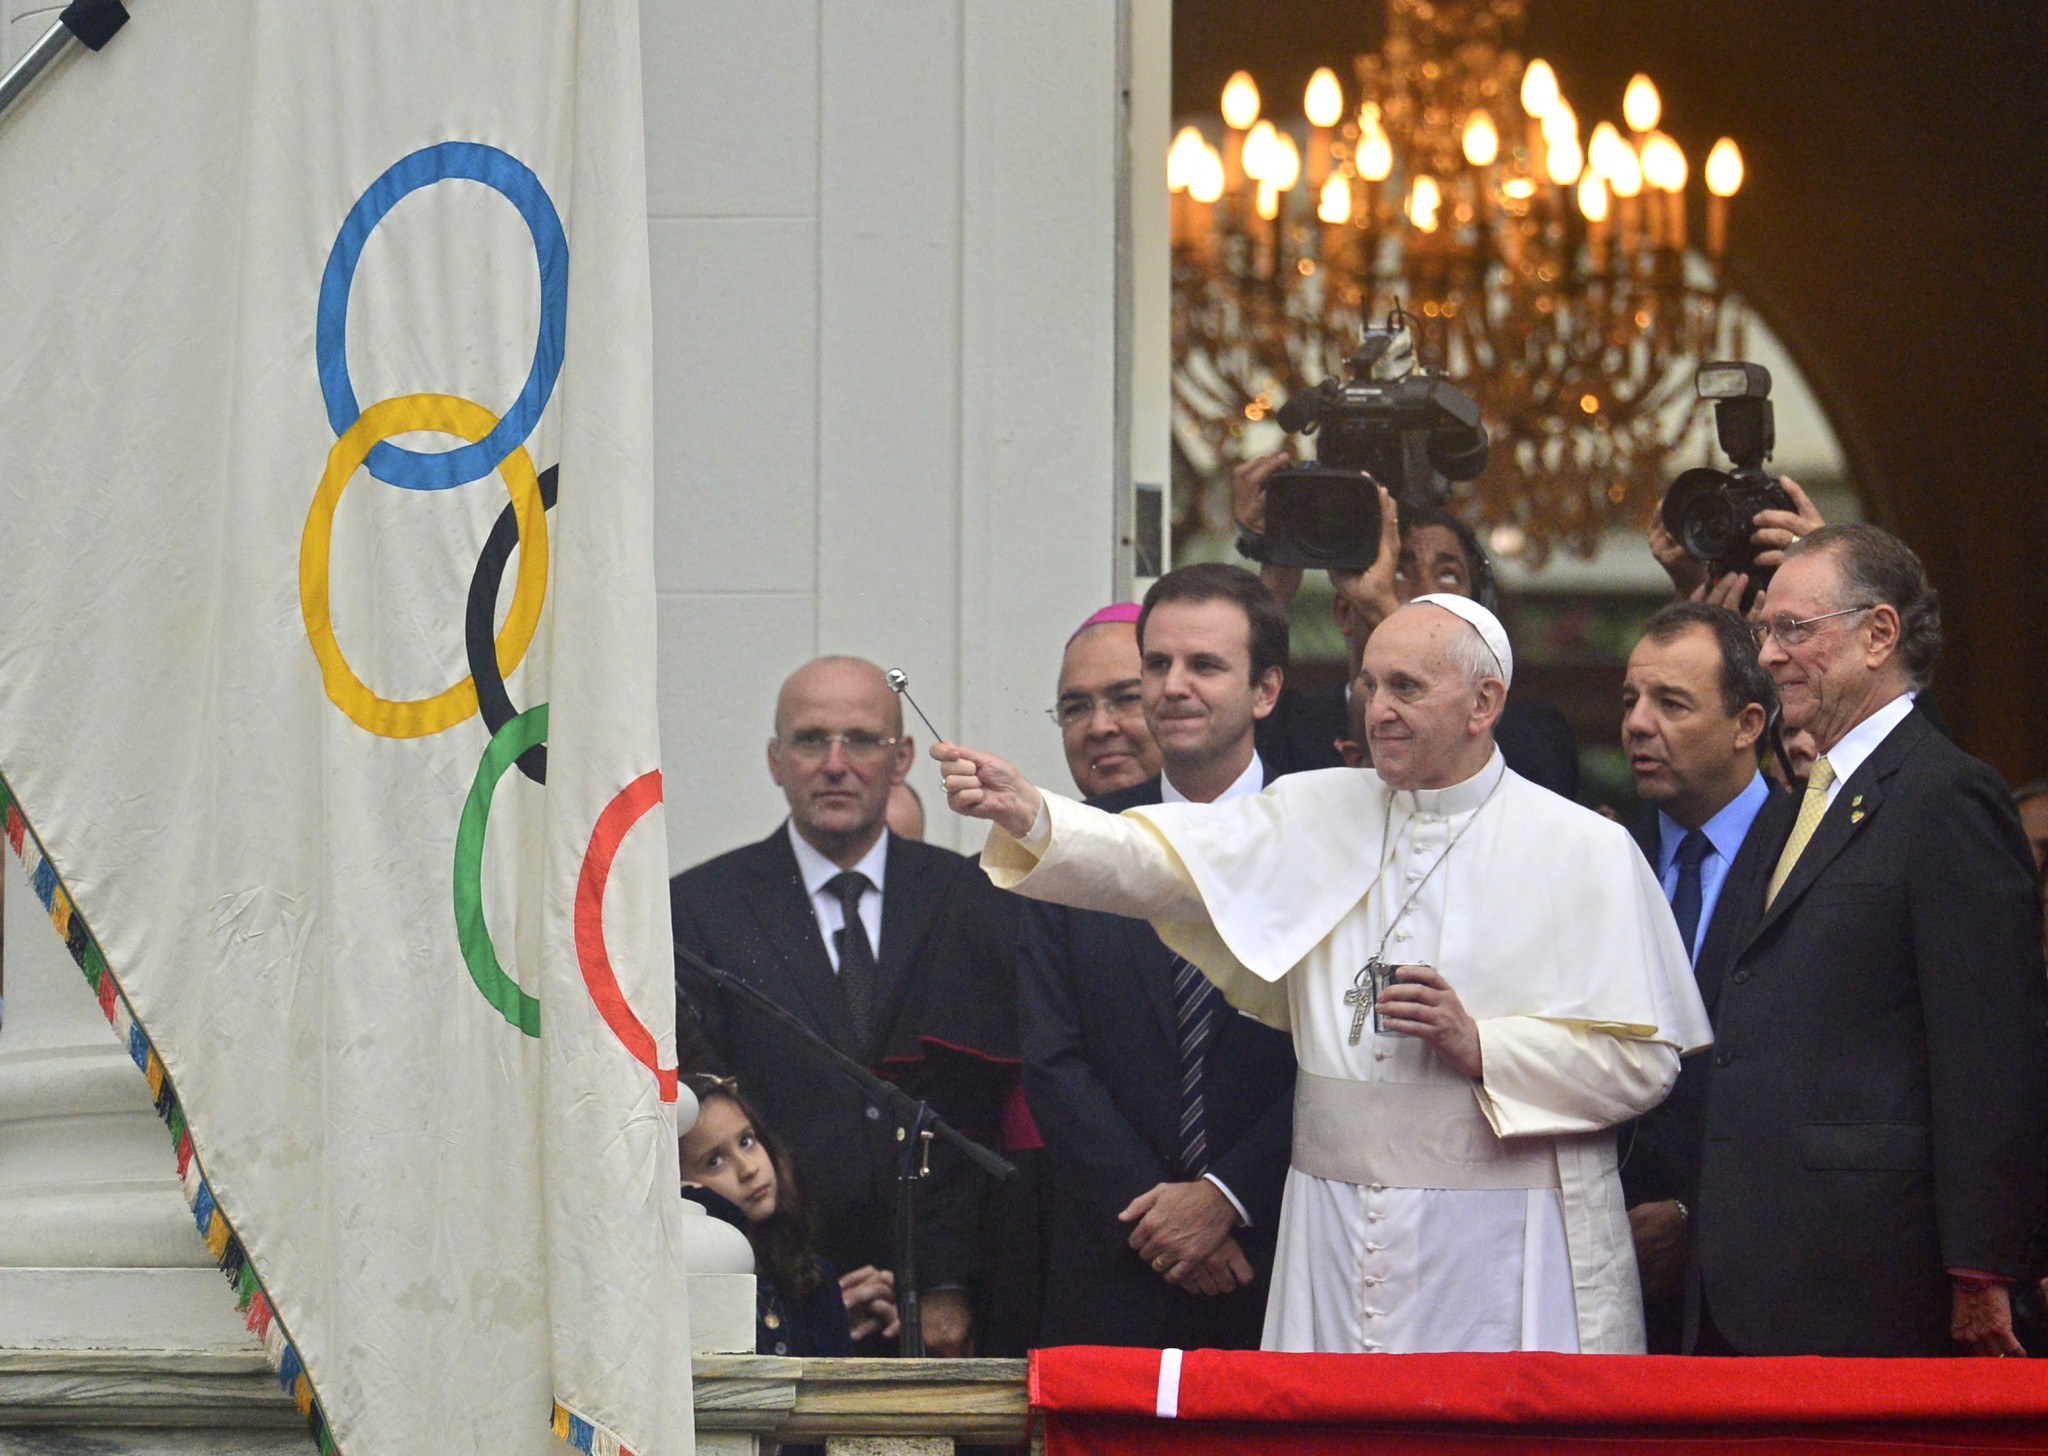 Pope Francis blessed the Olympic and Paralympic Flags in Rio de Janeiro during his first overseas visit after his election ©Getty Images